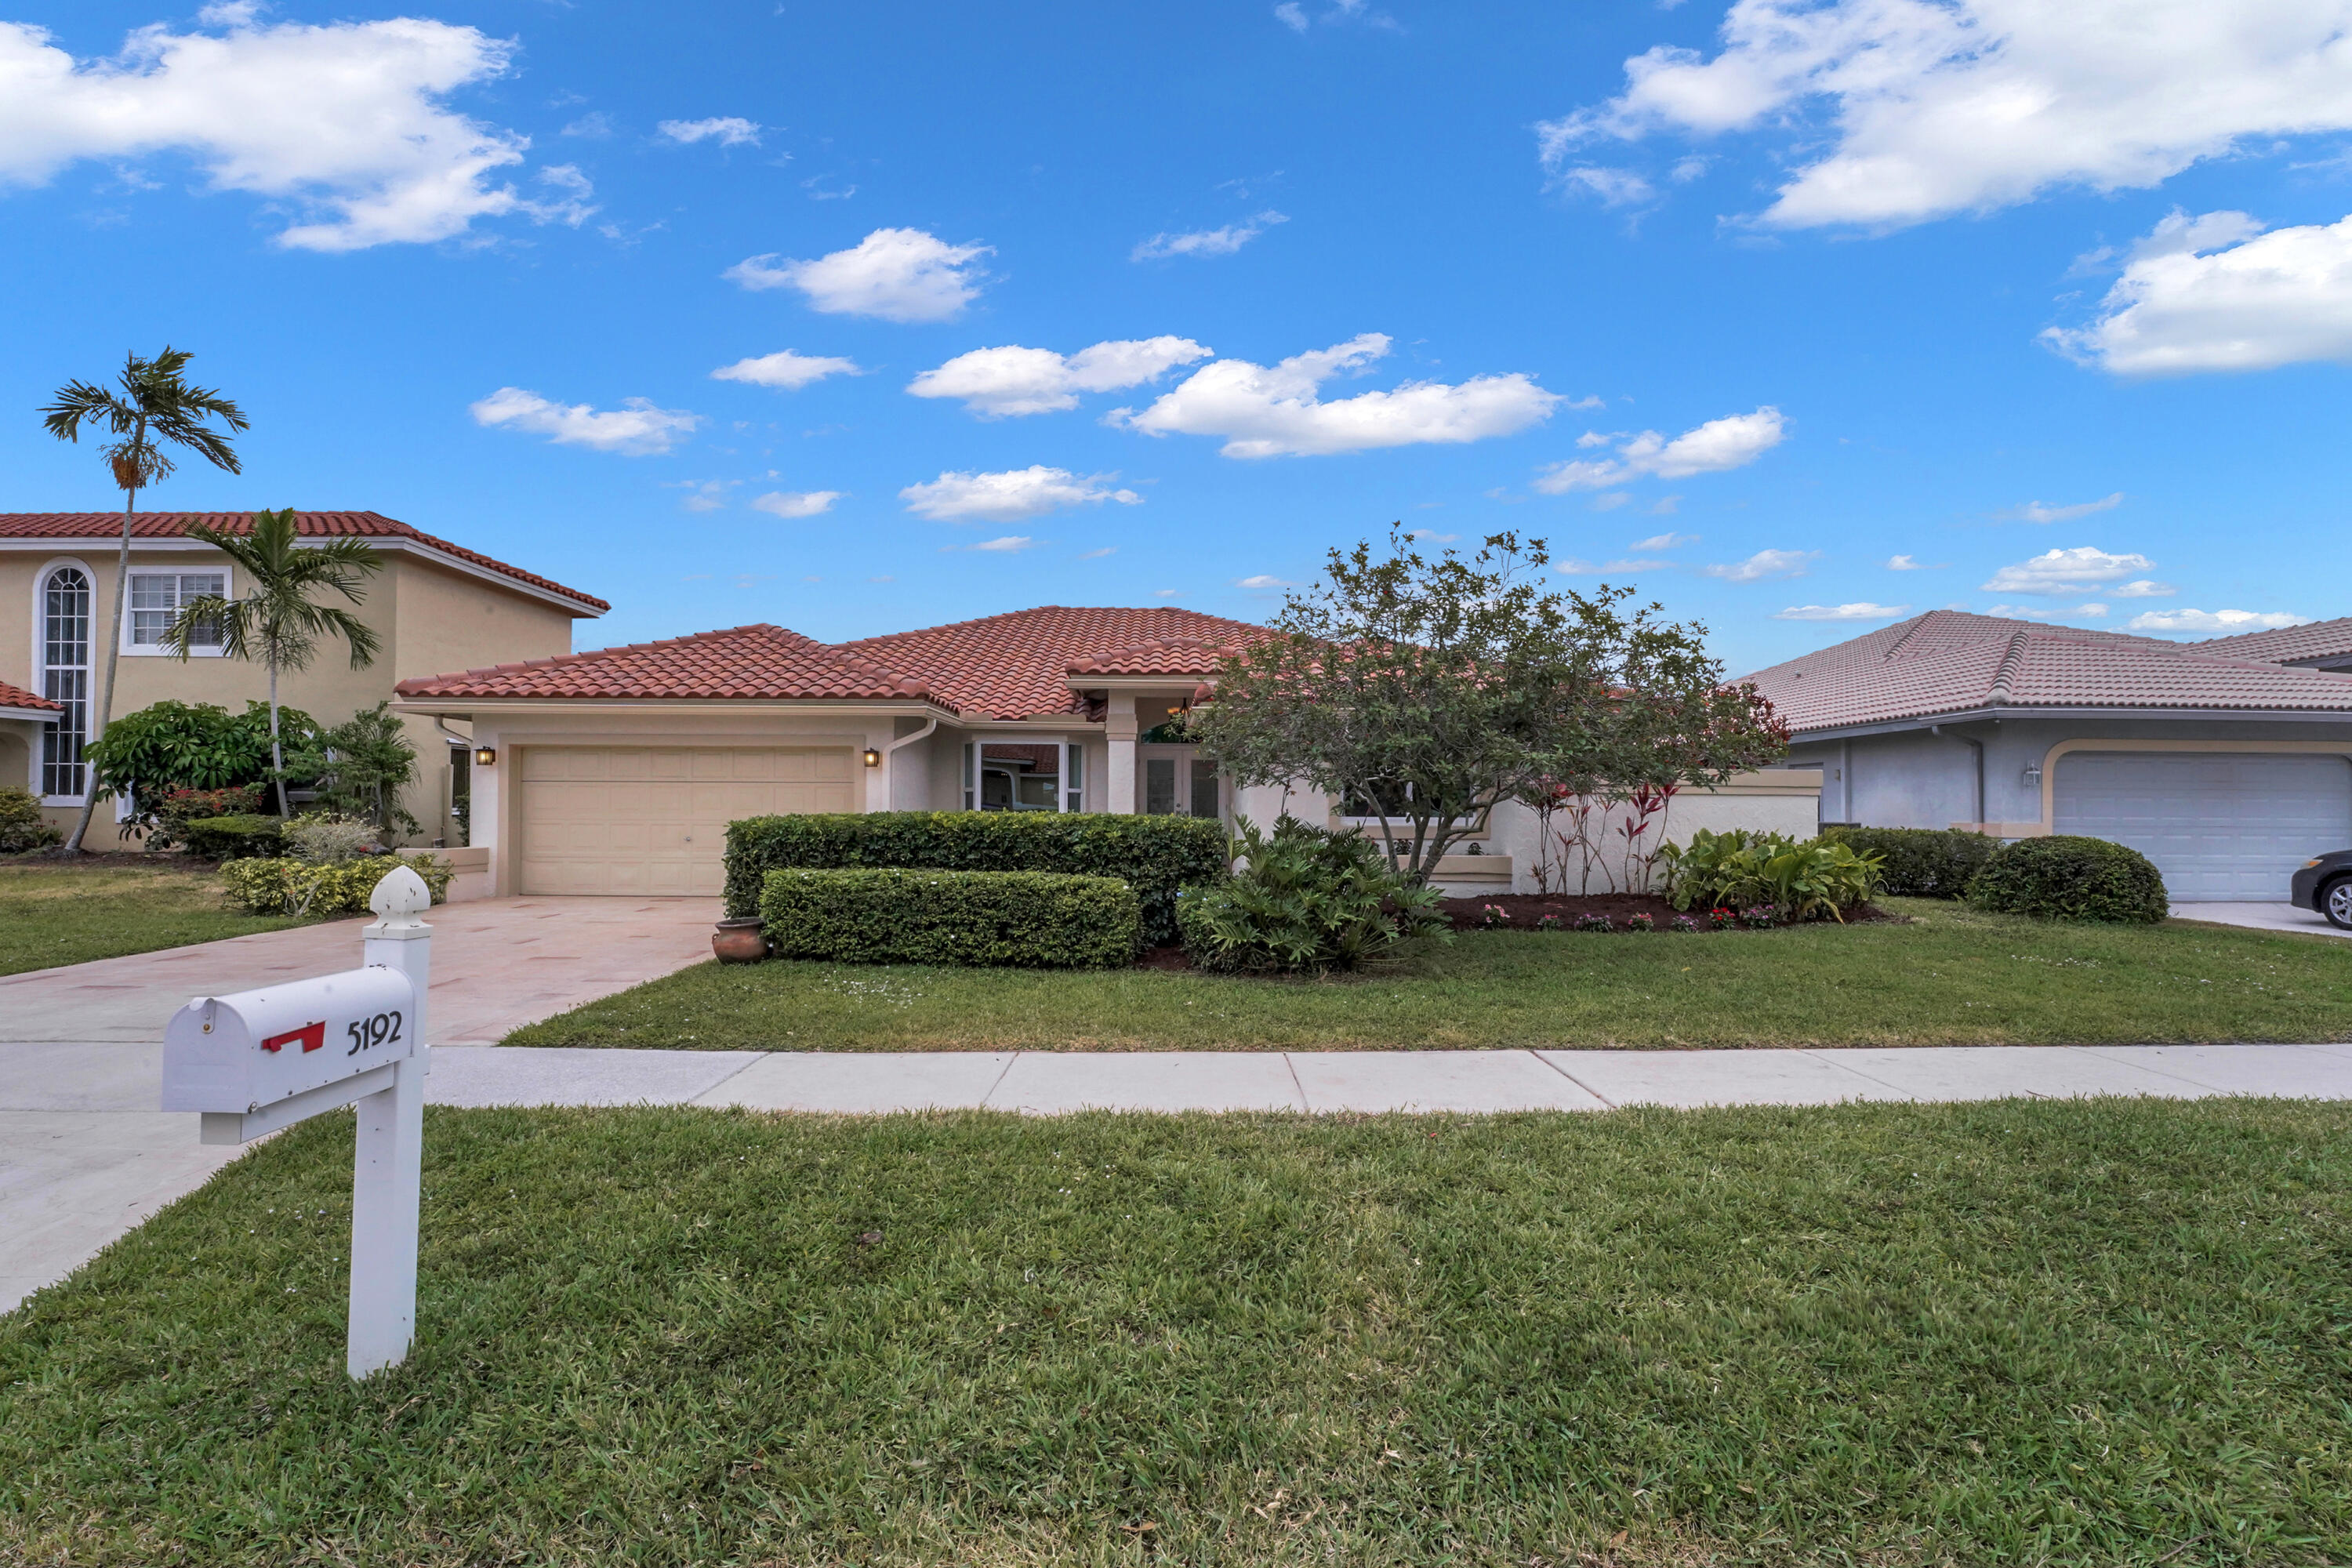 Property for Sale at 5192 Deerhurst Crescent Circle, Boca Raton, Palm Beach County, Florida - Bedrooms: 4 
Bathrooms: 2.5  - $995,000